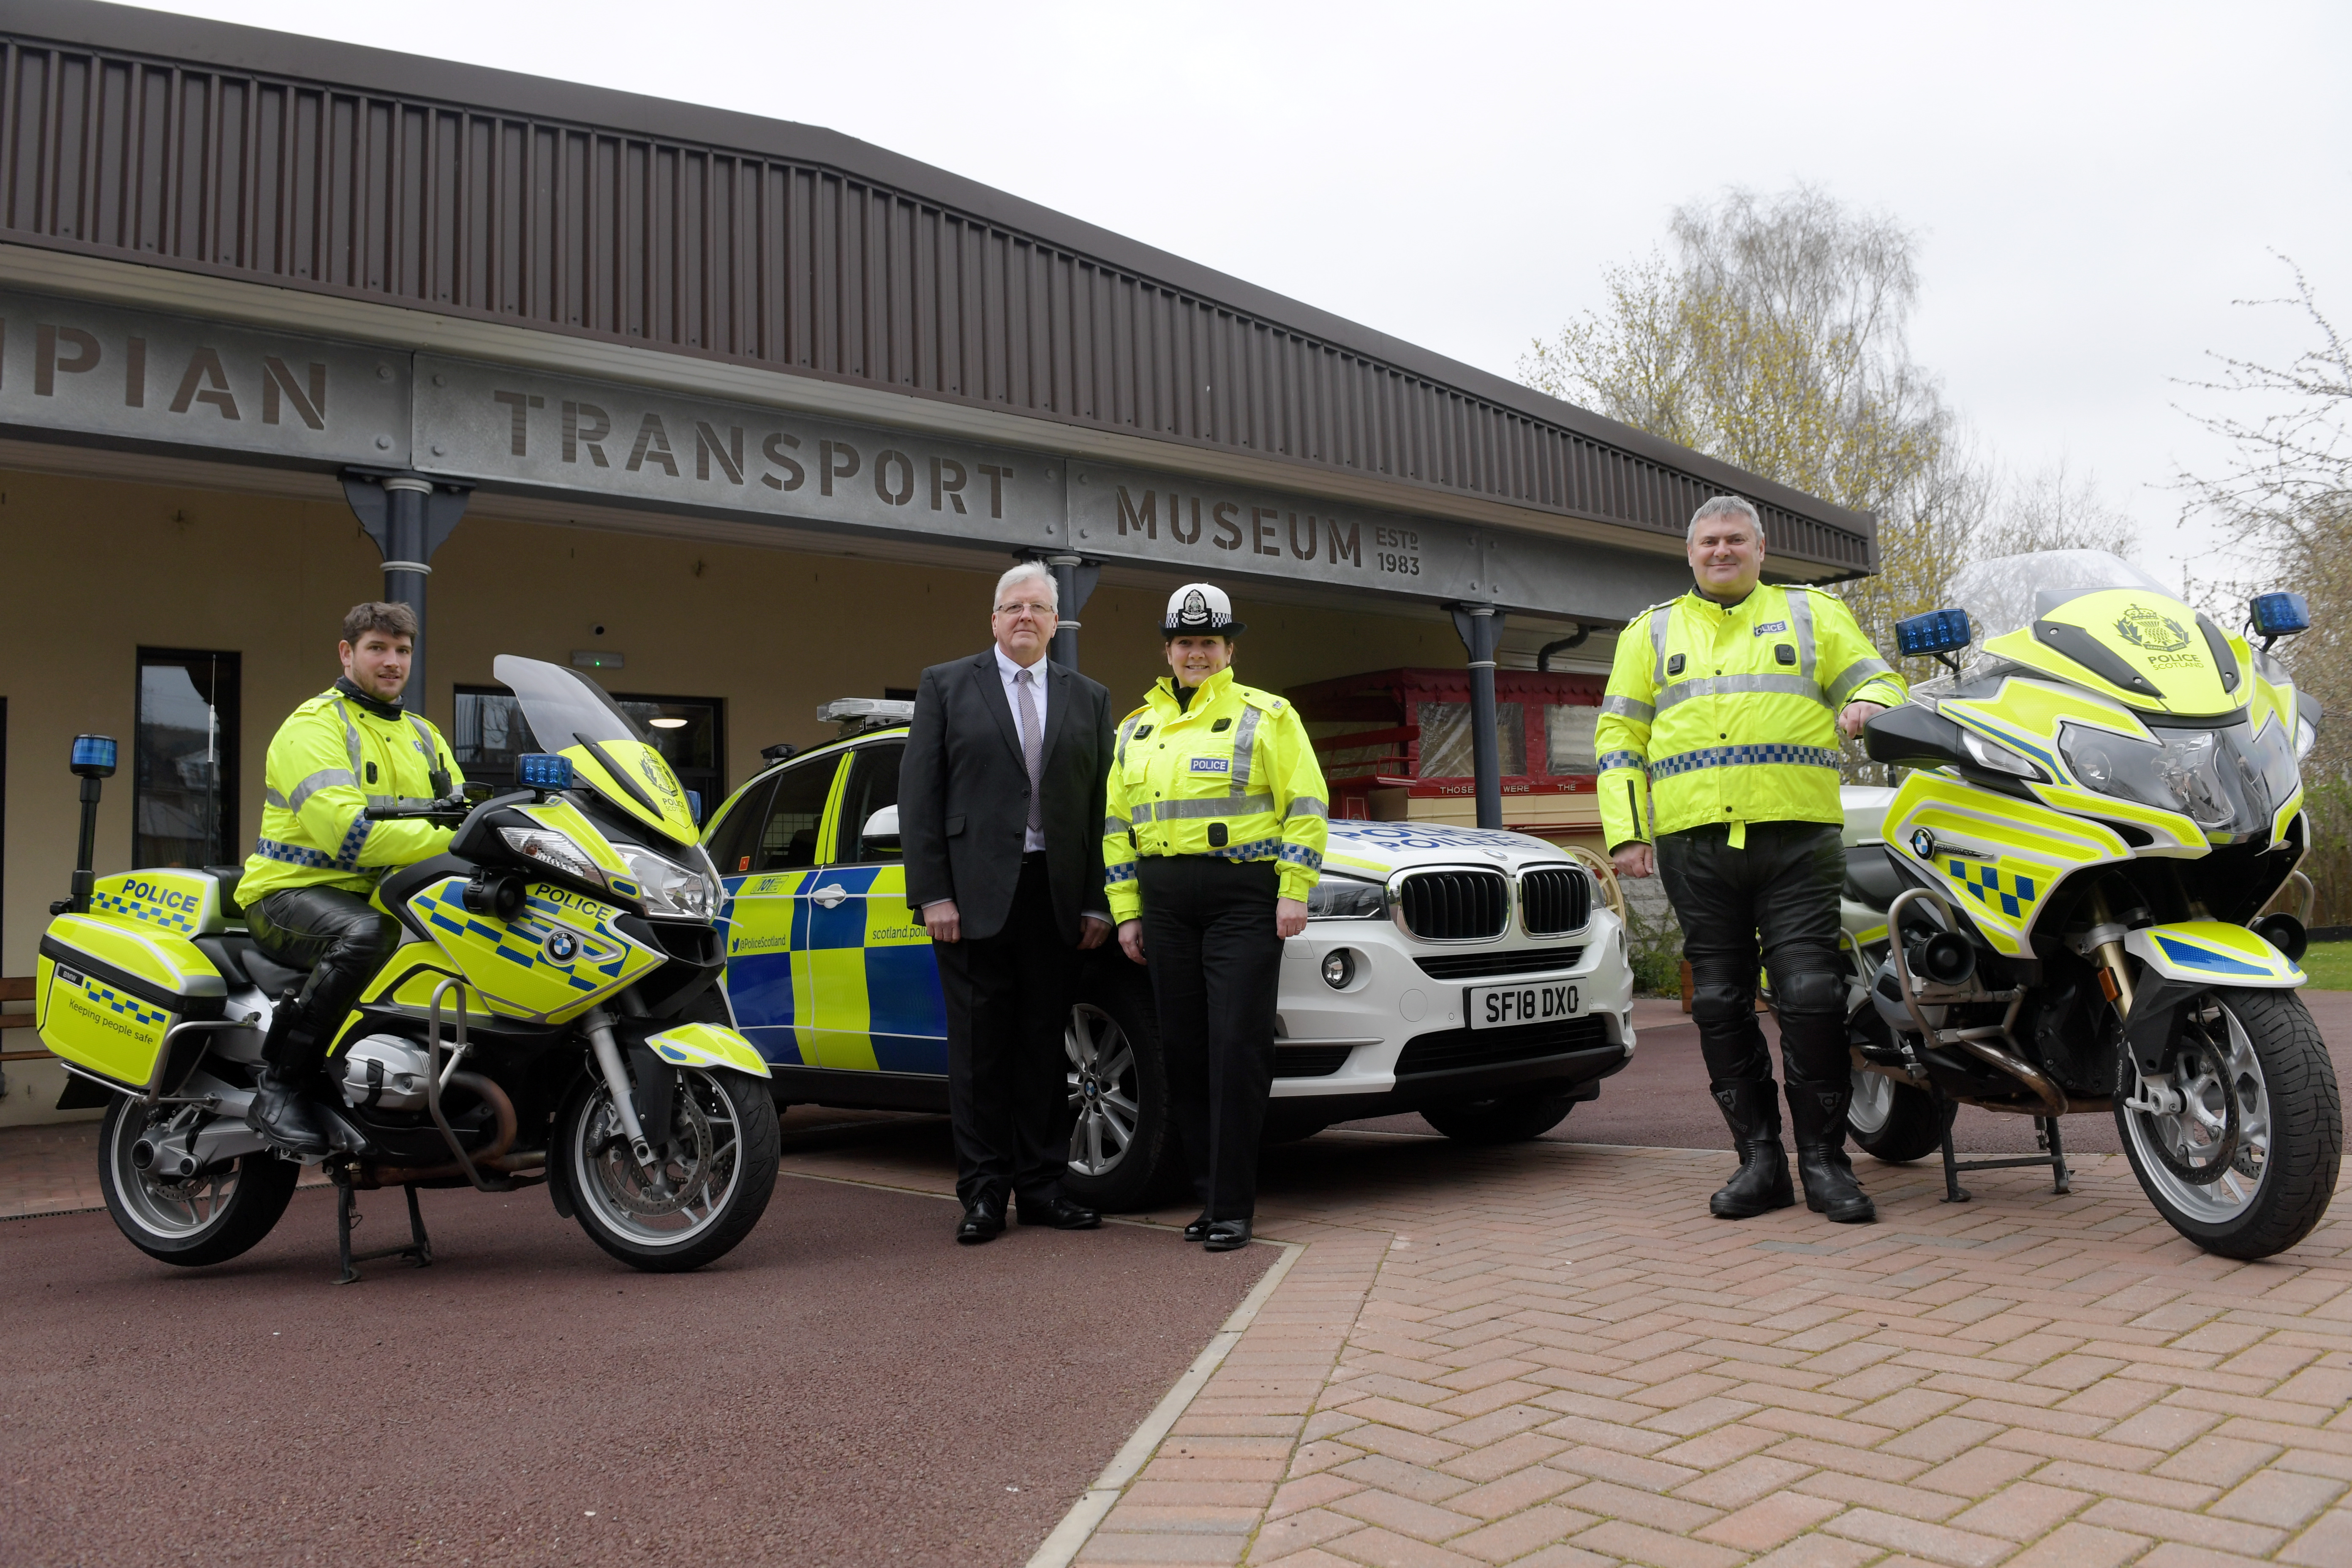 Launch of the 2019 Motorcycle Safety Campaign. From left, Constable Aaron White, Director of Road Safety Scotland Michael McDonnell, Deputy Head of Road Policing Louise Blakelock and Chief Inspector for Road Policing Stewart Mackie.